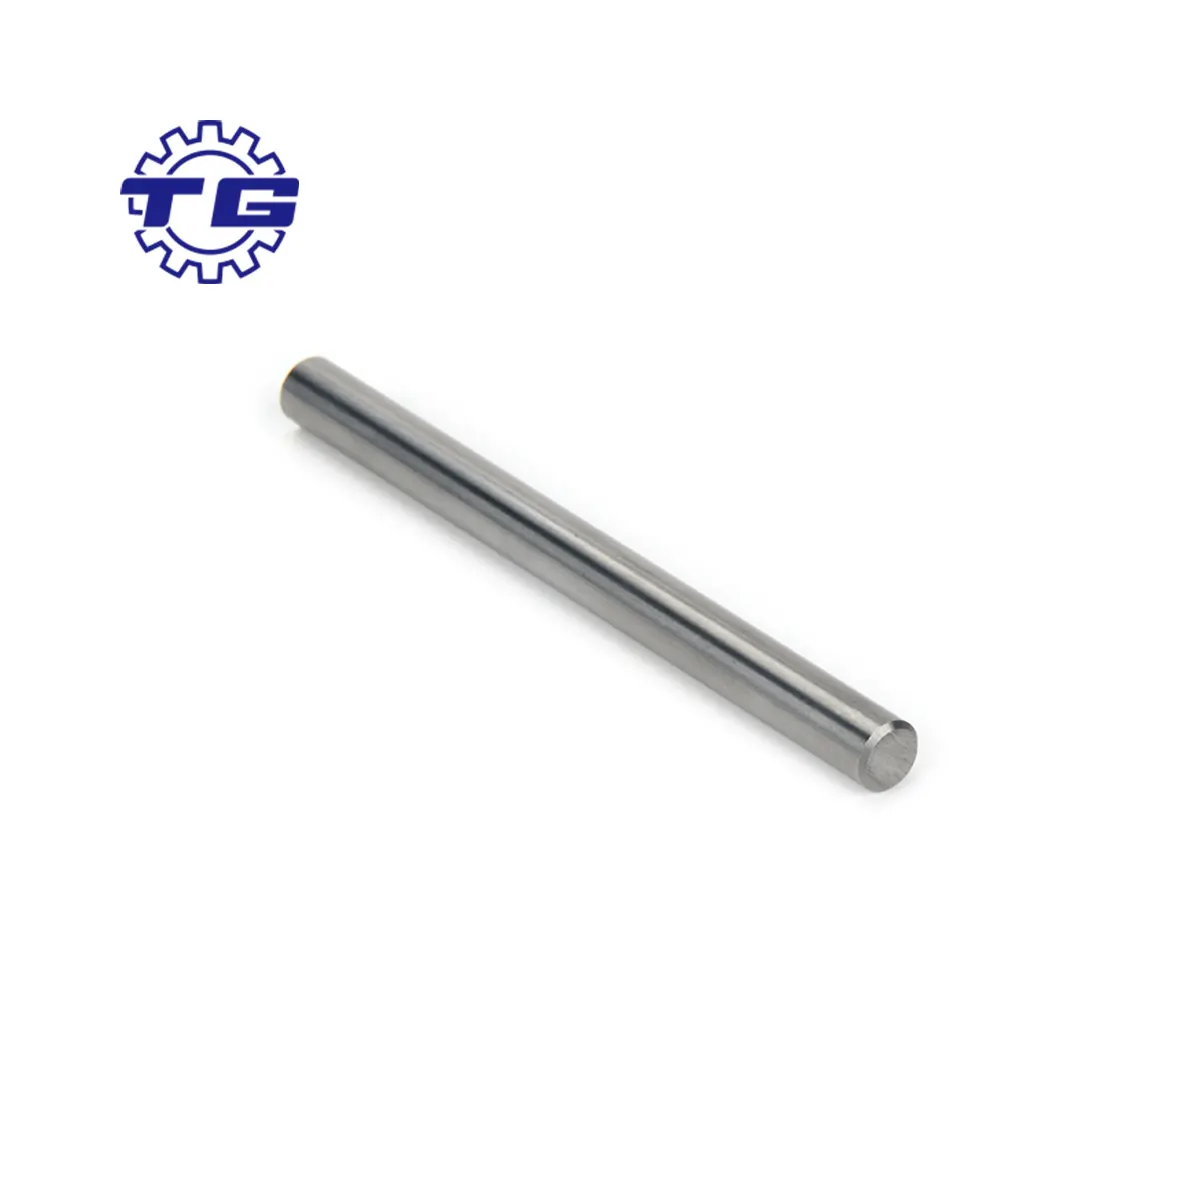 Tg In Stock Excellent Hardness Tungsten Round Rod Ground Long Rods H6 12% Cobalt Carbide Rod For Steel